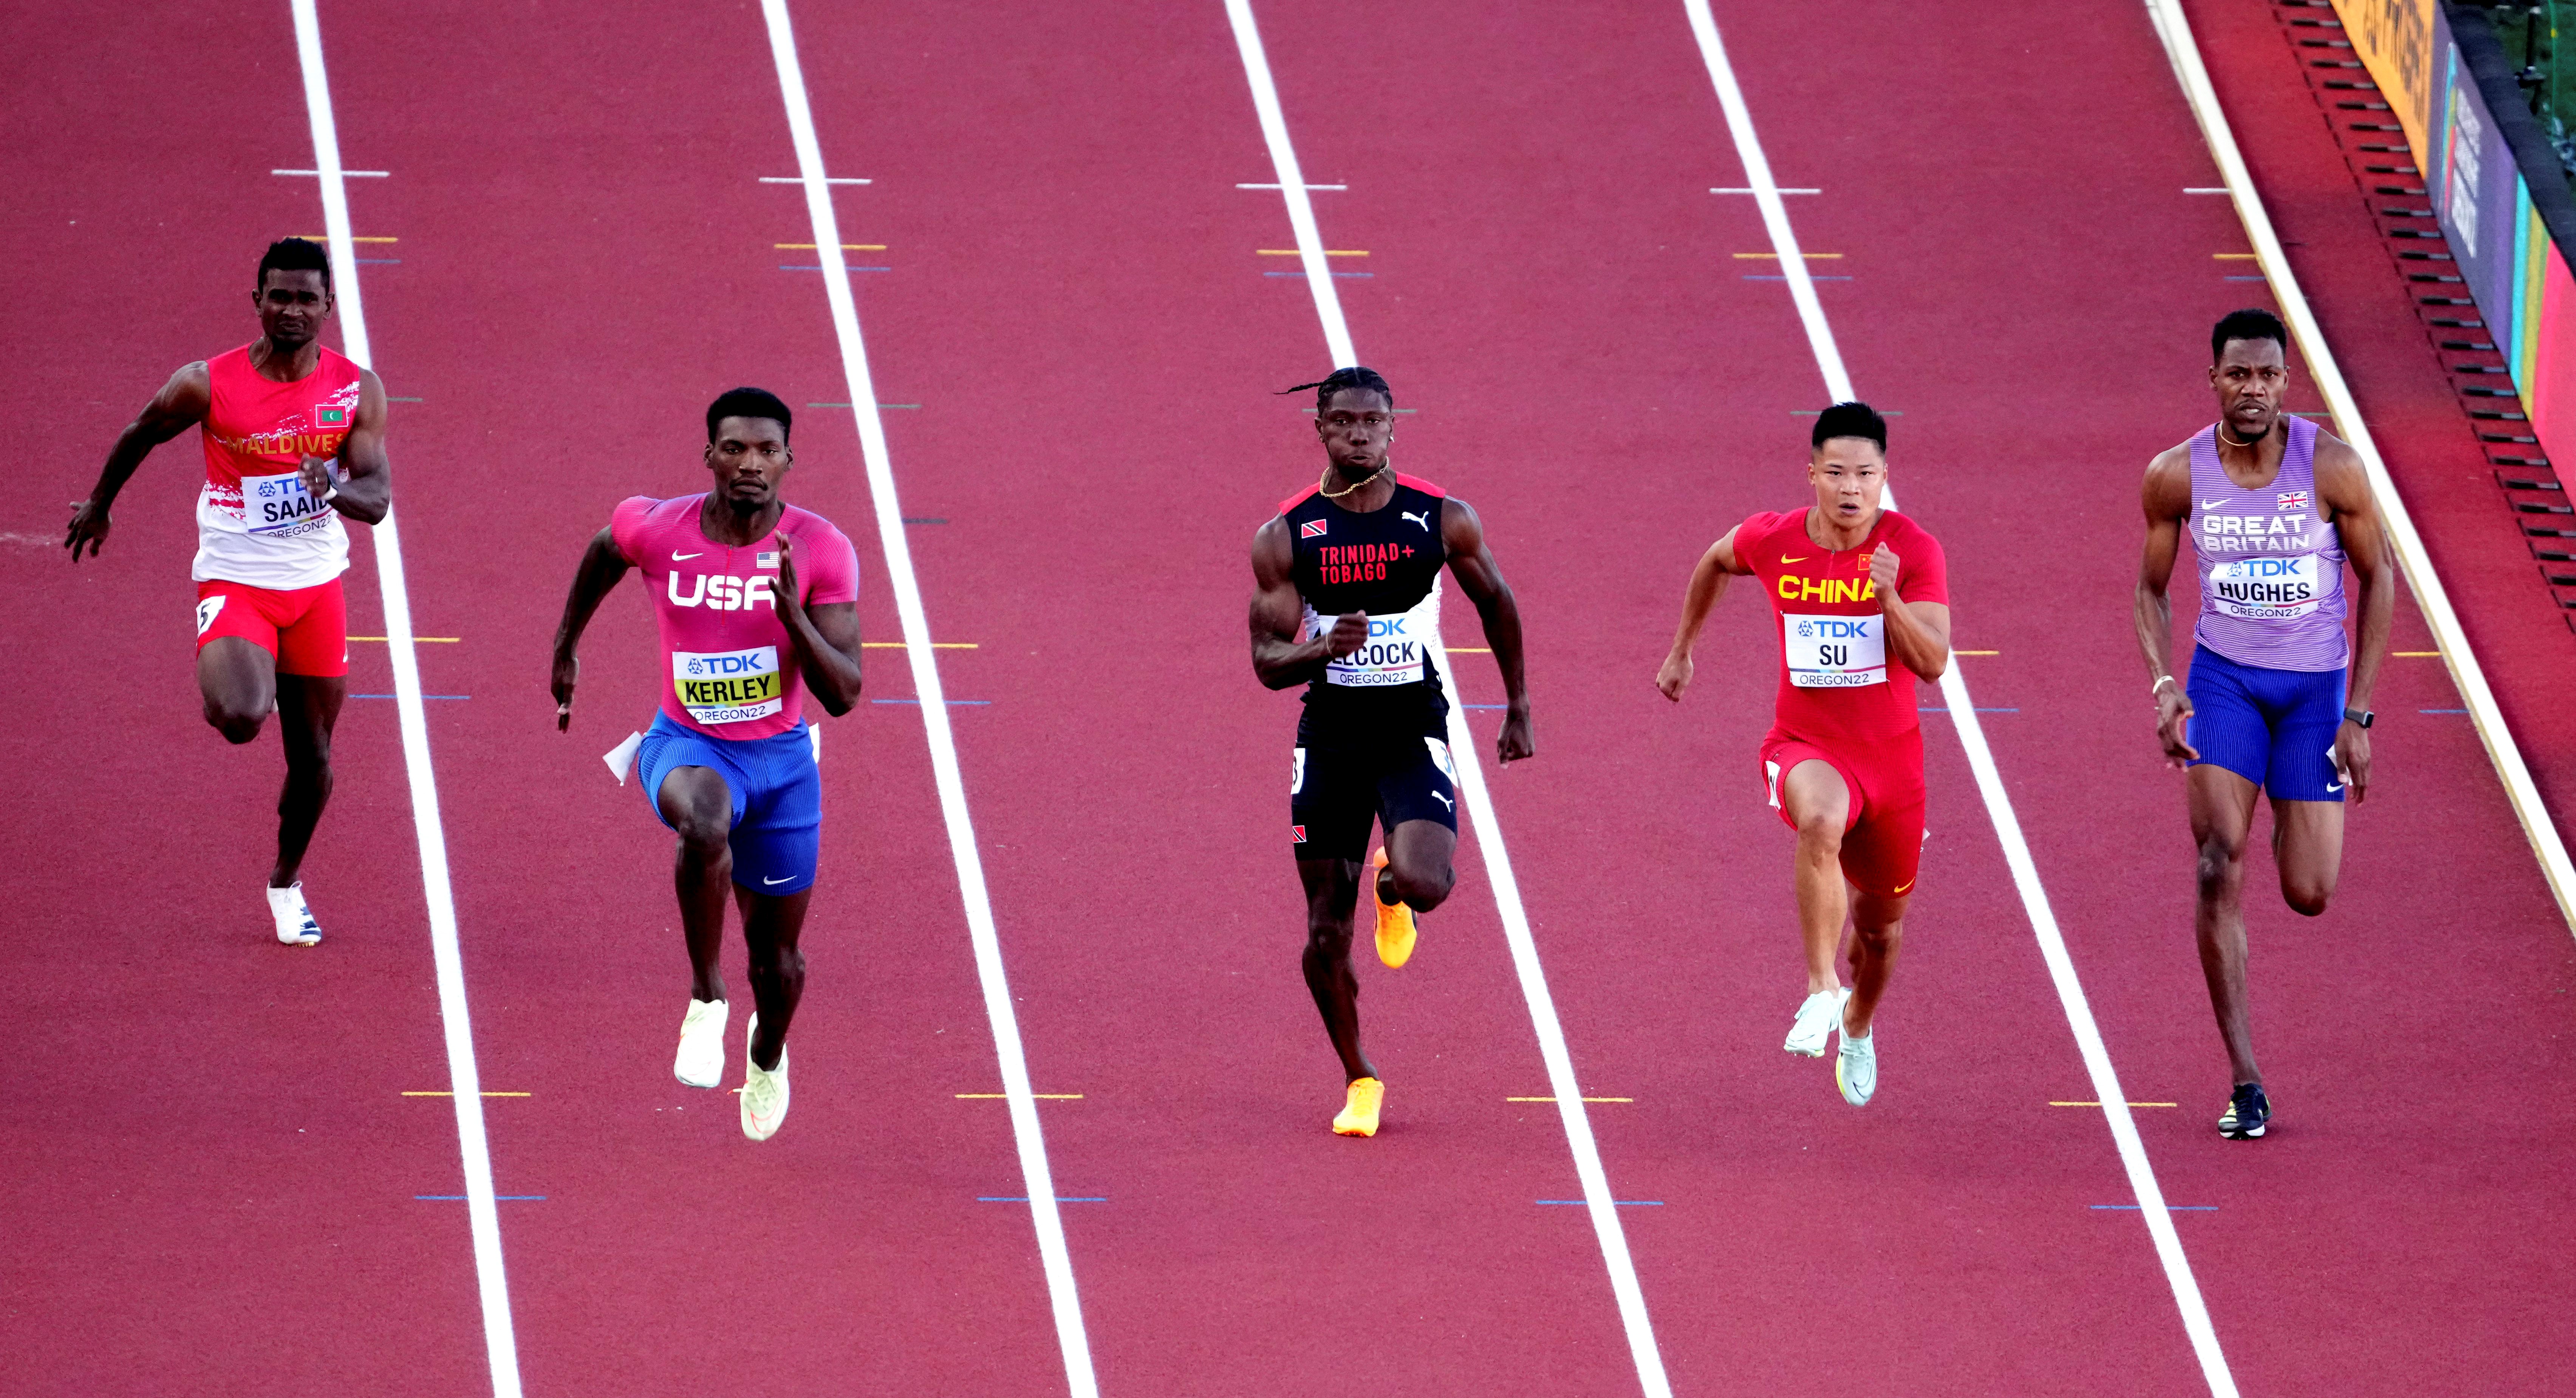 Su Bingtian 2nd R of China competes during the men’s 100m heat at the World Athletics Championships Oregon22 in Eugene, Oregon, the United States, July 15, 2022.